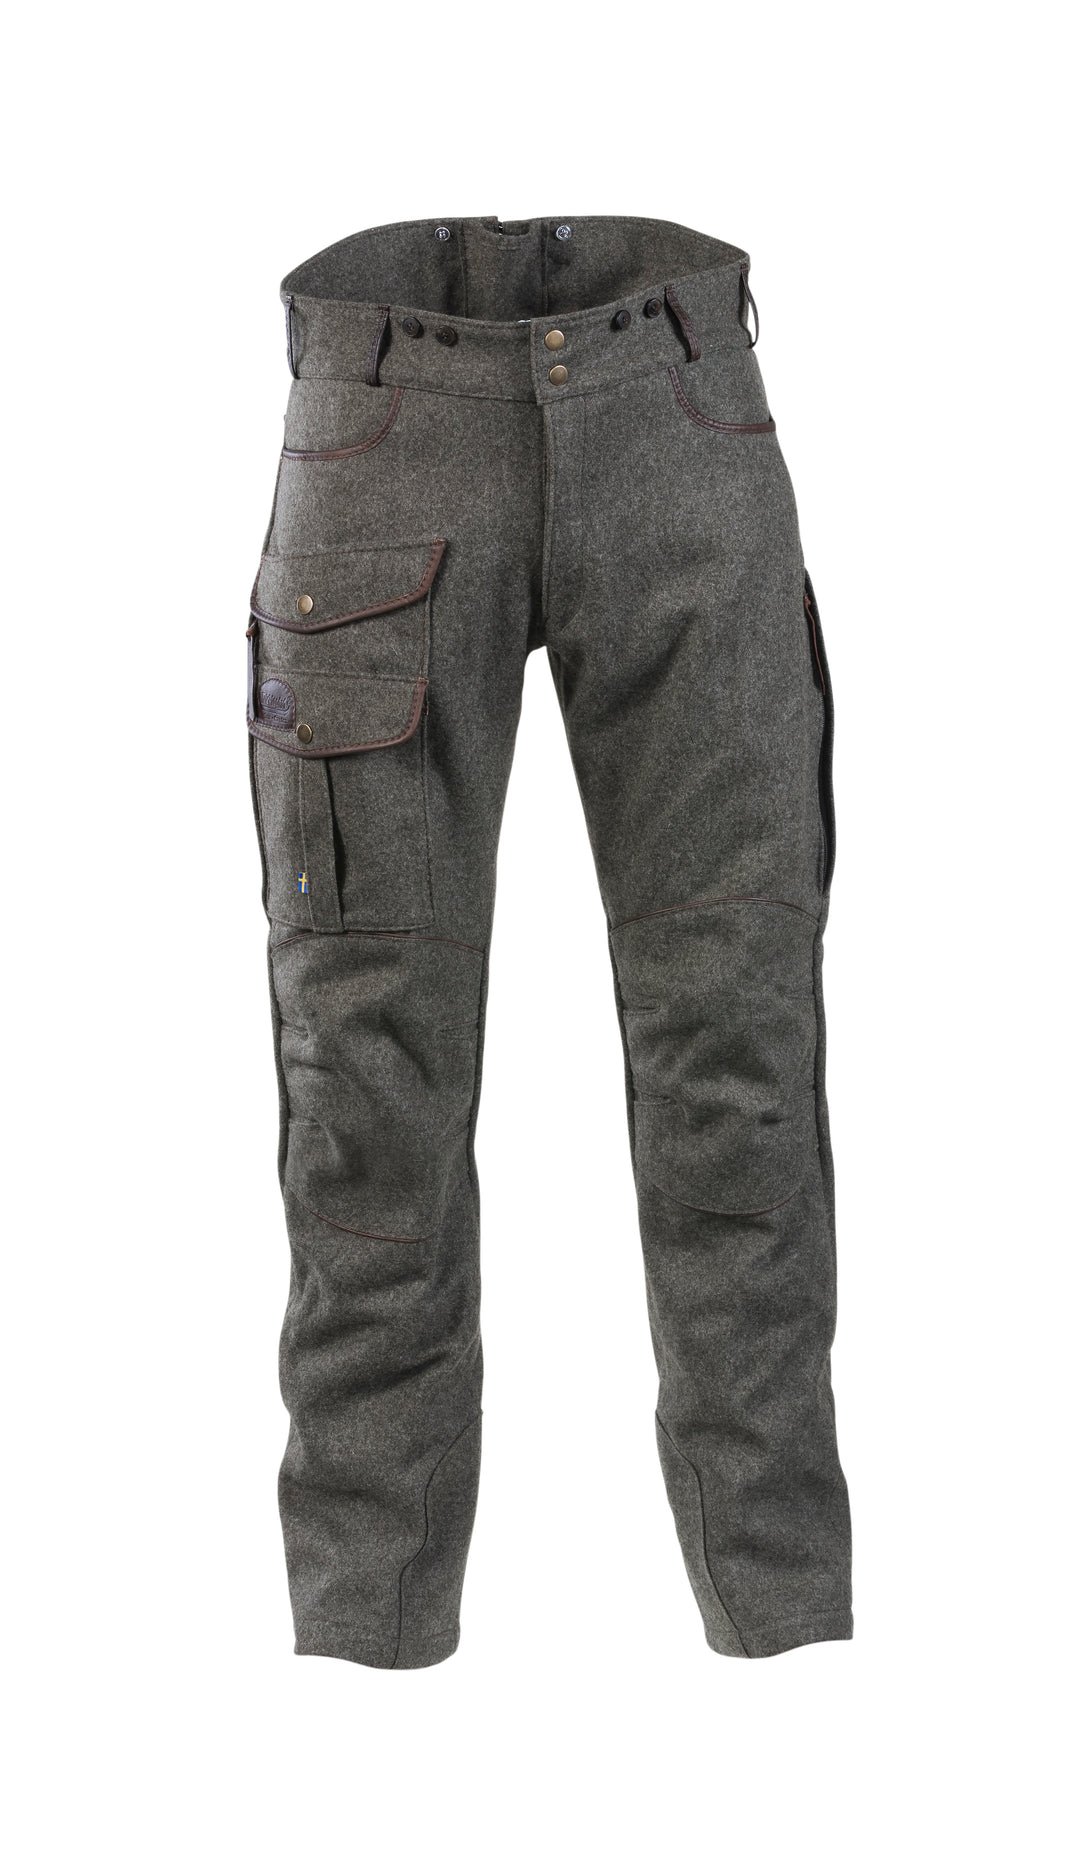 Boys Jersey Pants With Pockets - City Threads USA